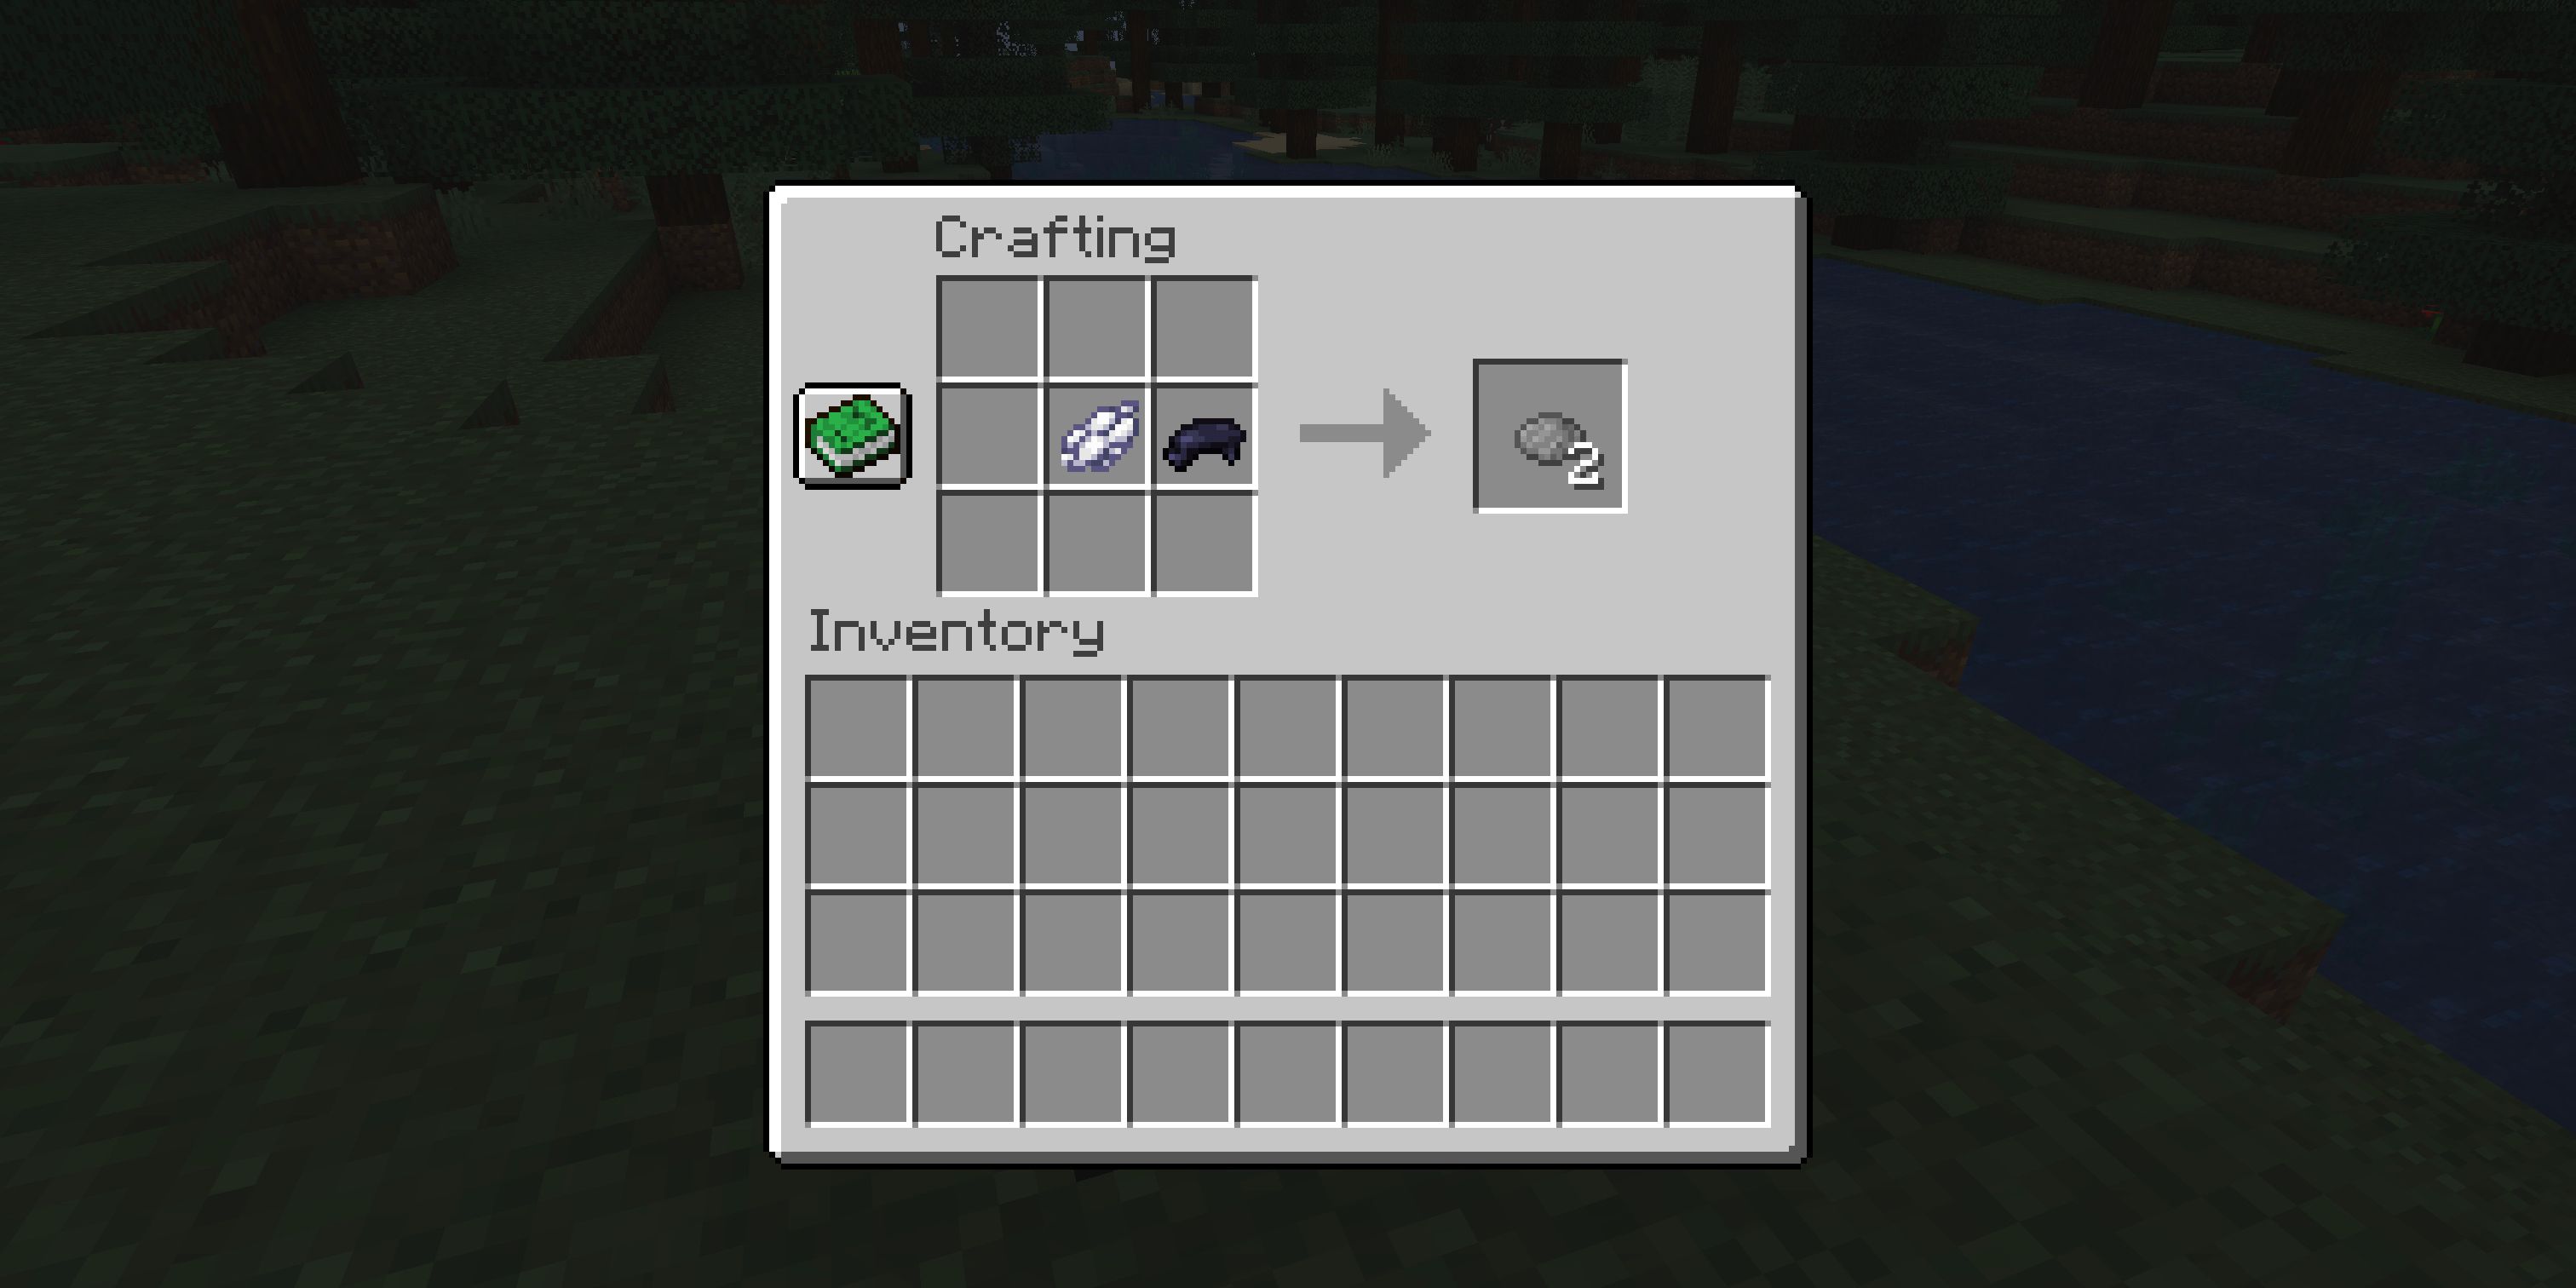 The crafting recipe for gray dye in Minecraft